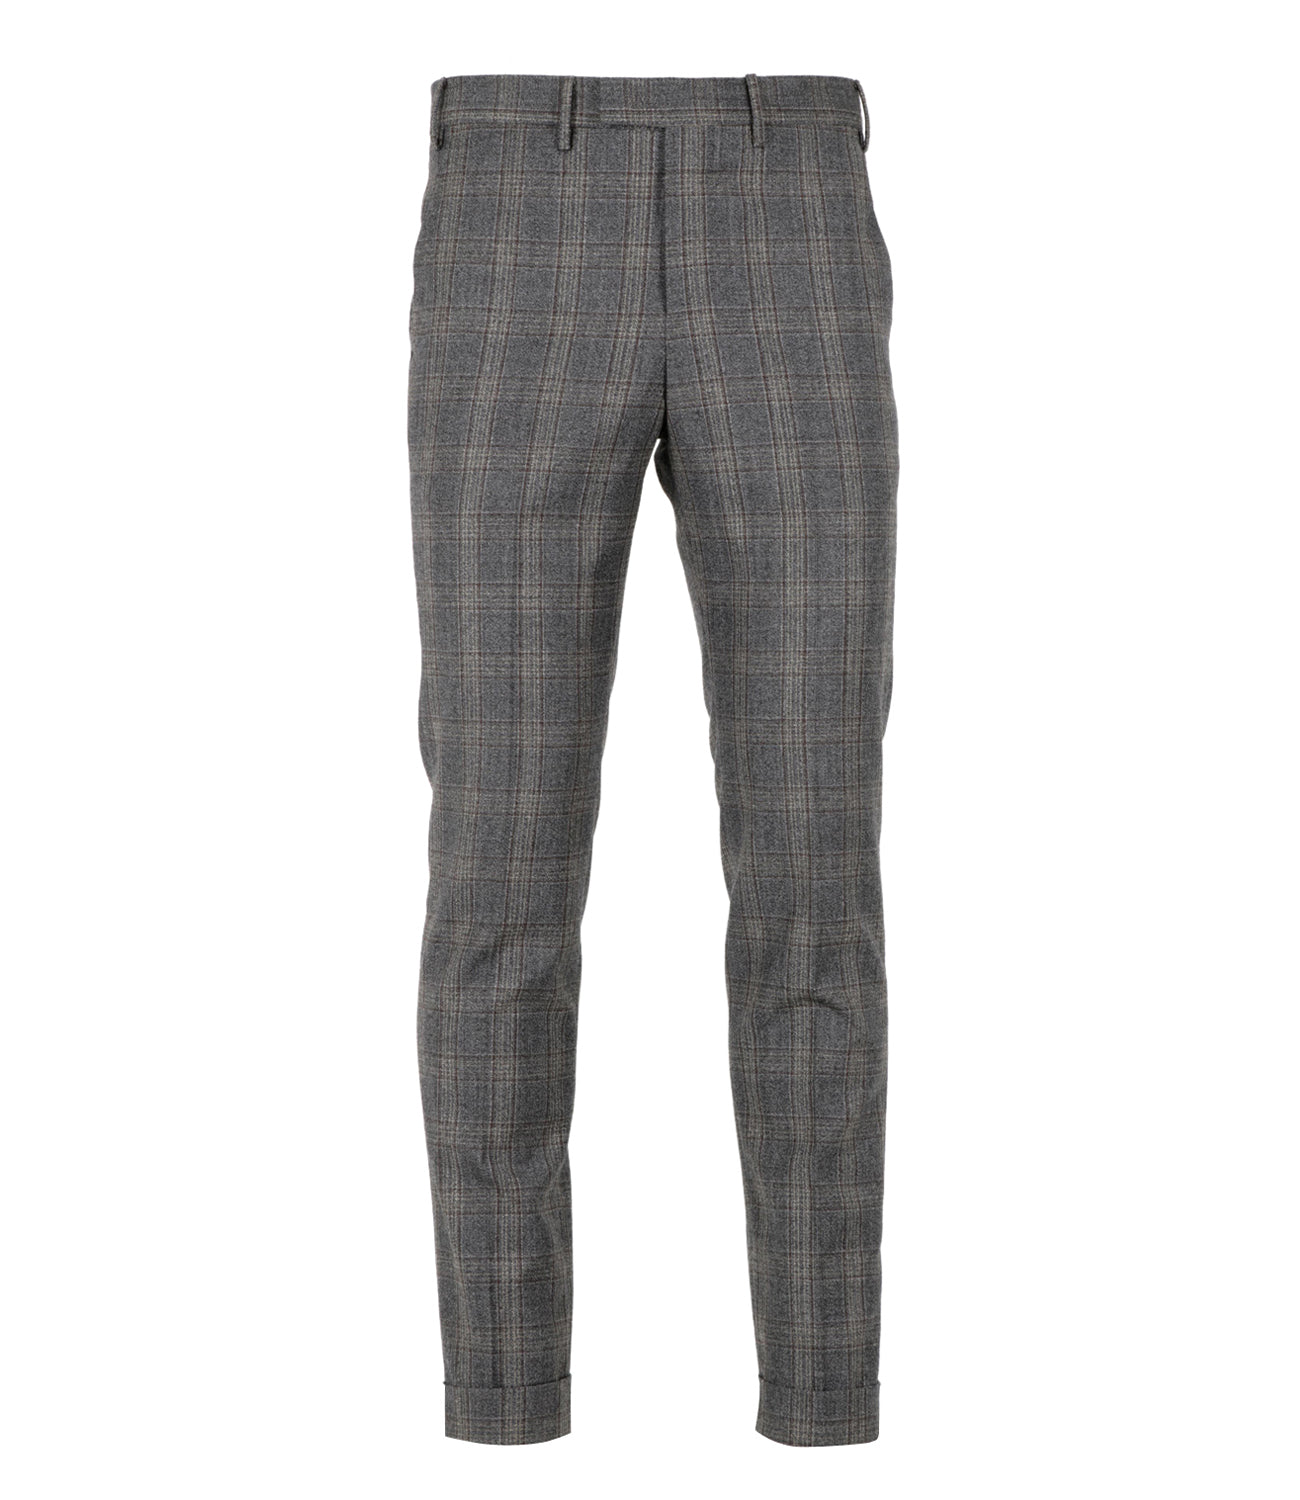 PT Torino | Brown and Grey Trousers